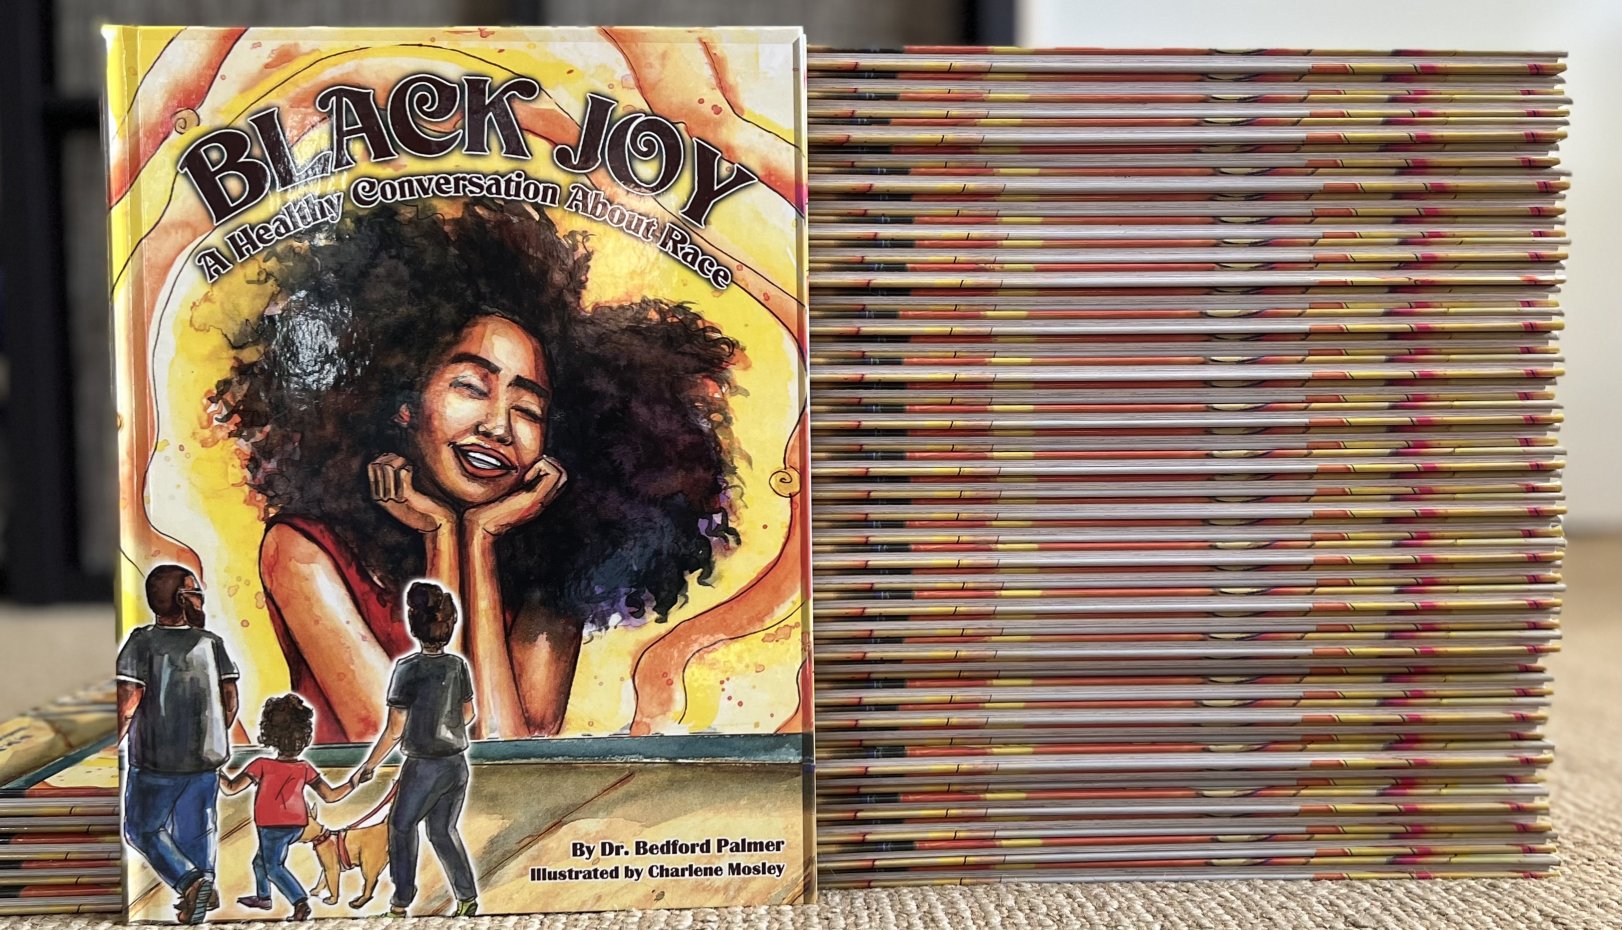 The cover of Bedford Palmer II's book, Black Joy, is shown